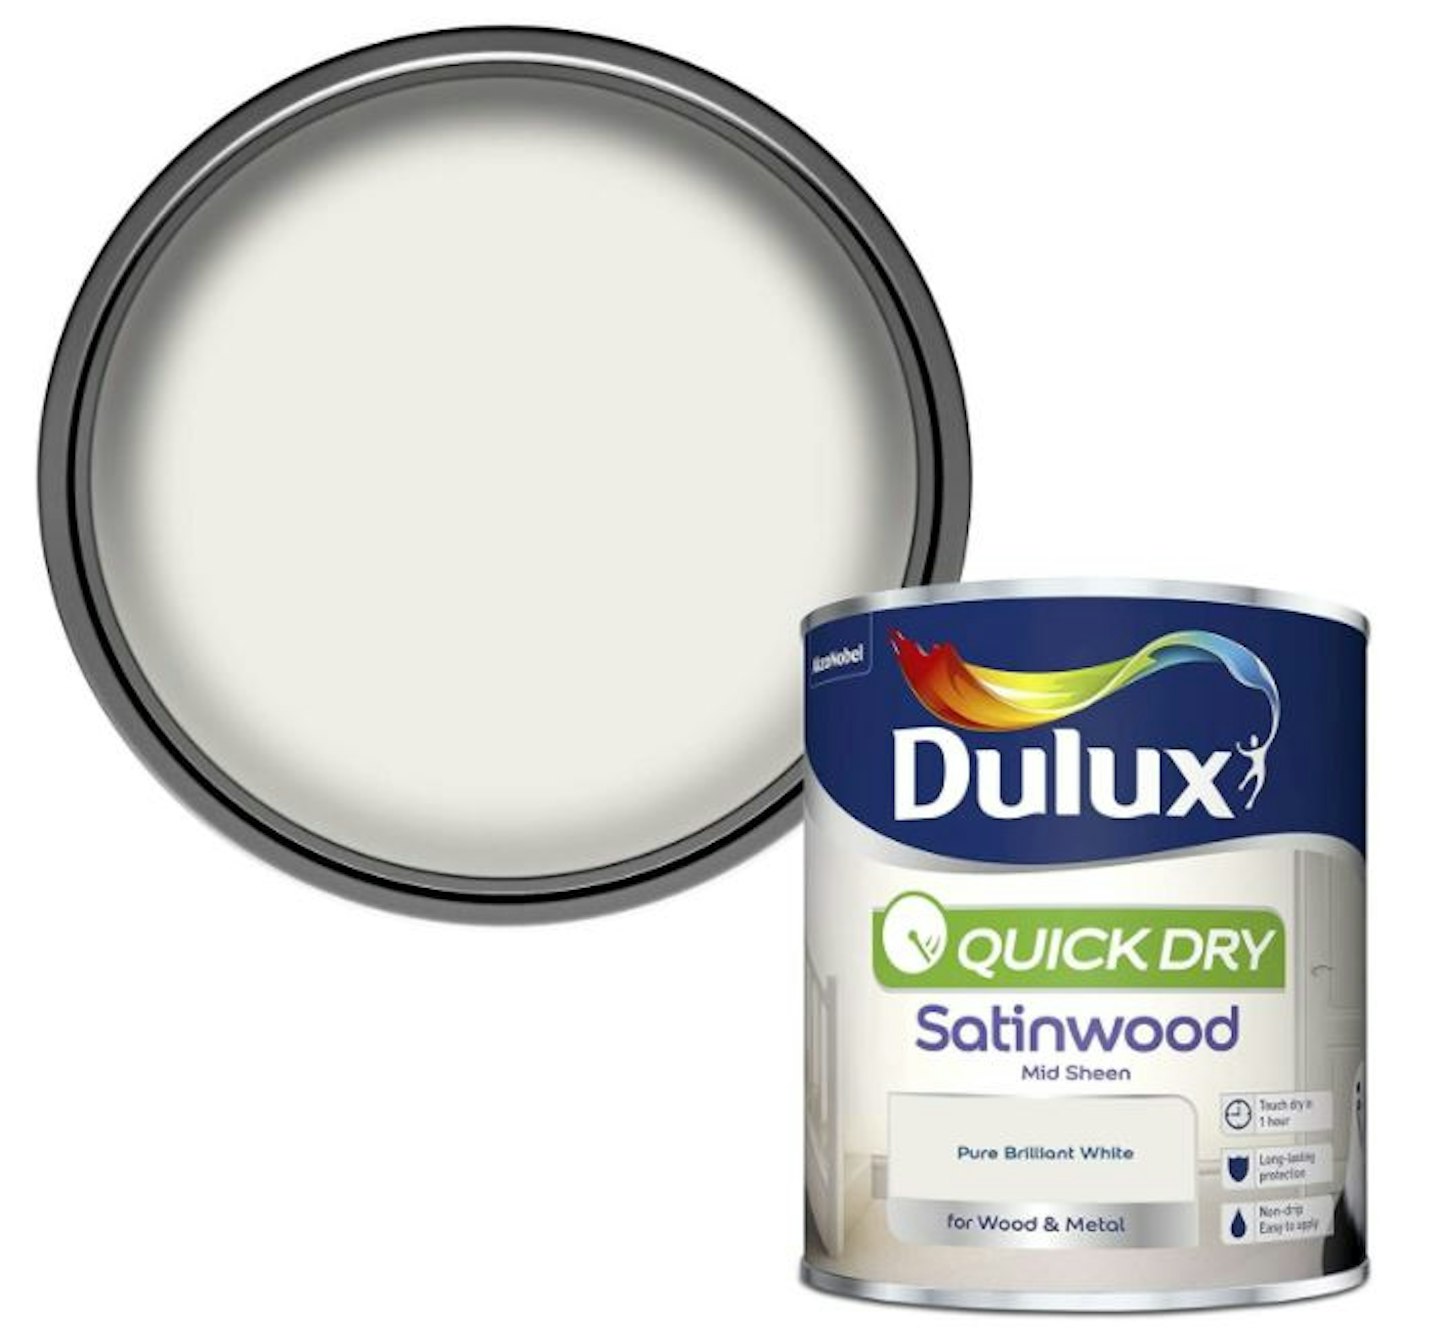 Dulux Quick Dry Satinwood Paint For Wood And Metal